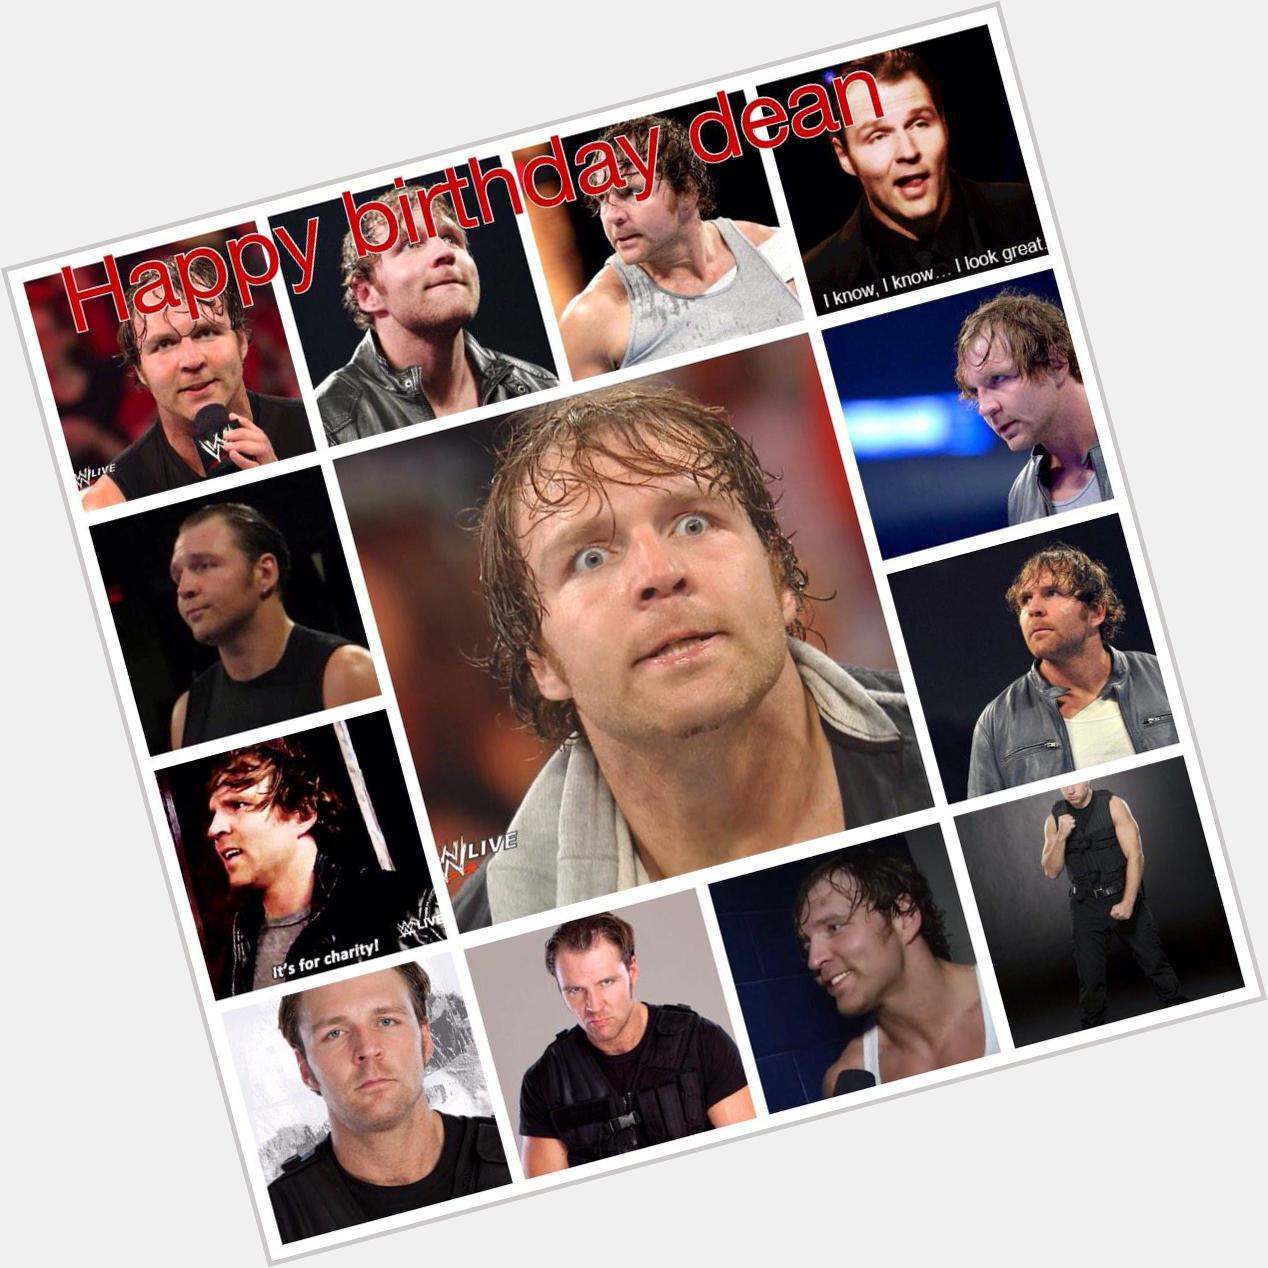 HAPPY BIRTHDAY TO THE WONDERFUL PERSON KNOWN AS DEAN AMBROSE  